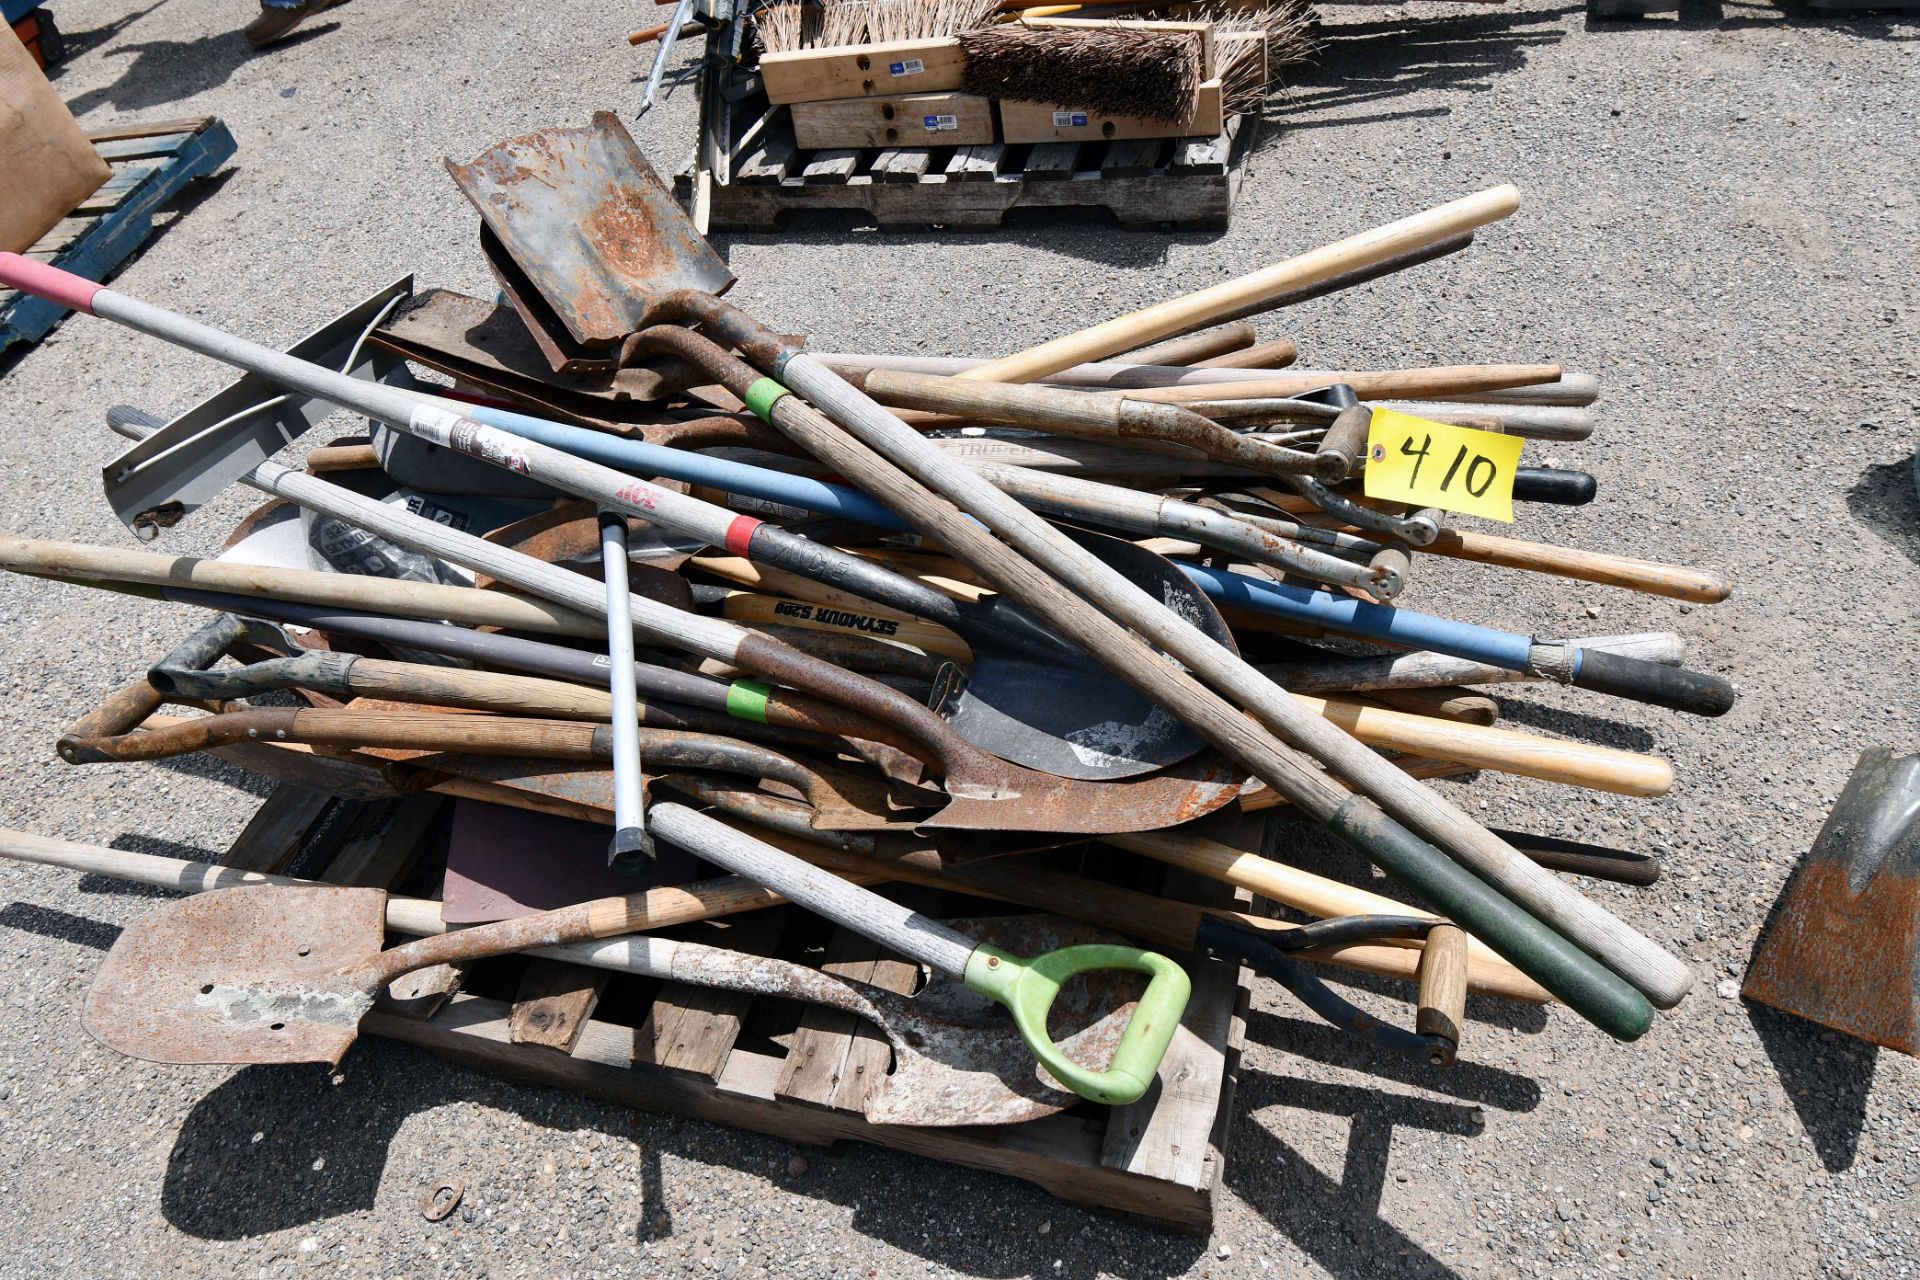 LOT OF SHOVELS (on one pallet) (Location: MDS Boring & Drilling, 11900 Hirsch Road, Houston, TX